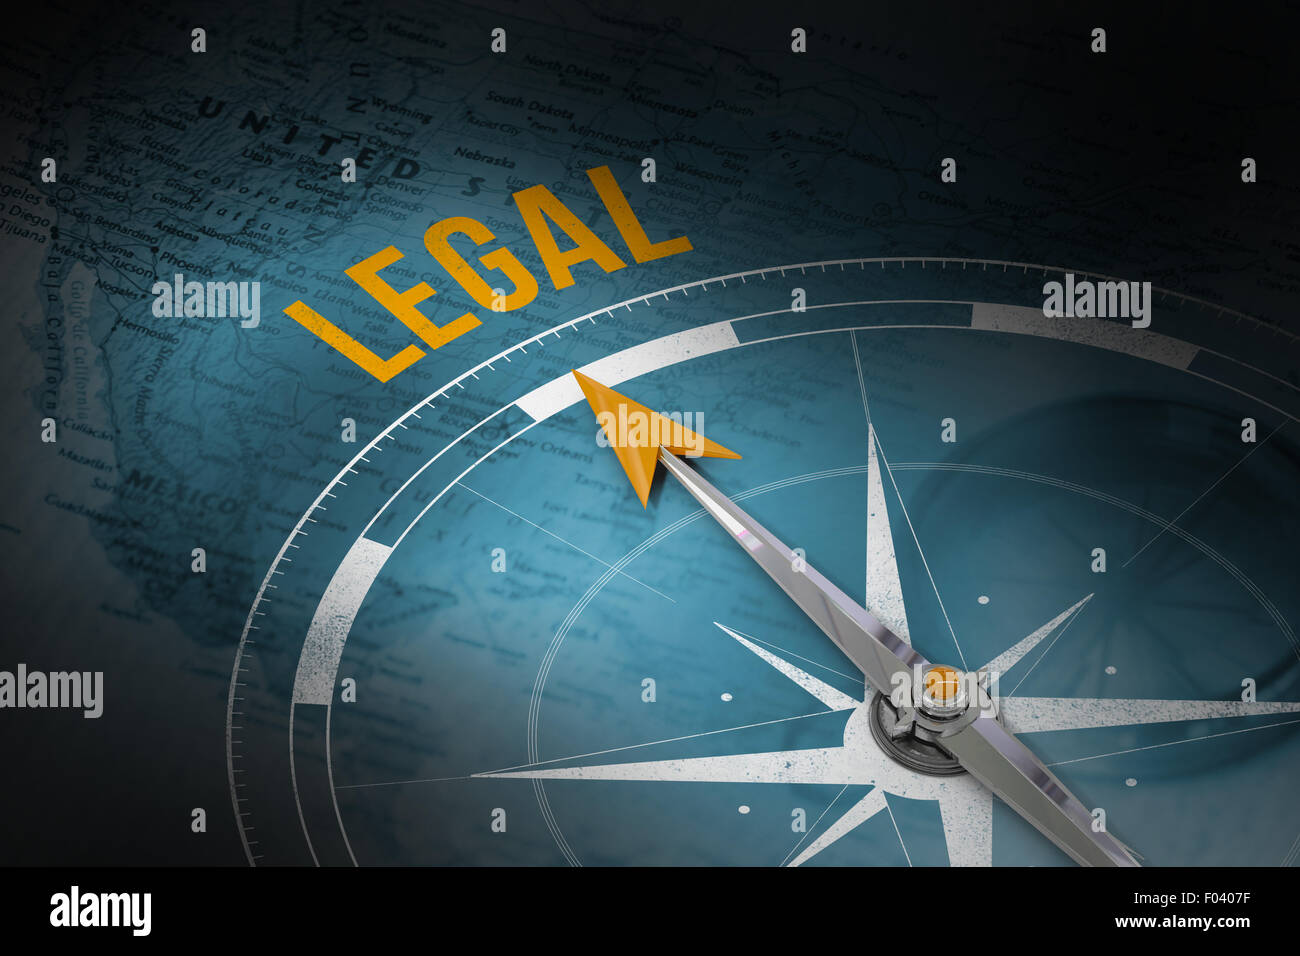 Legal against world map with compass showing north america Stock Photo